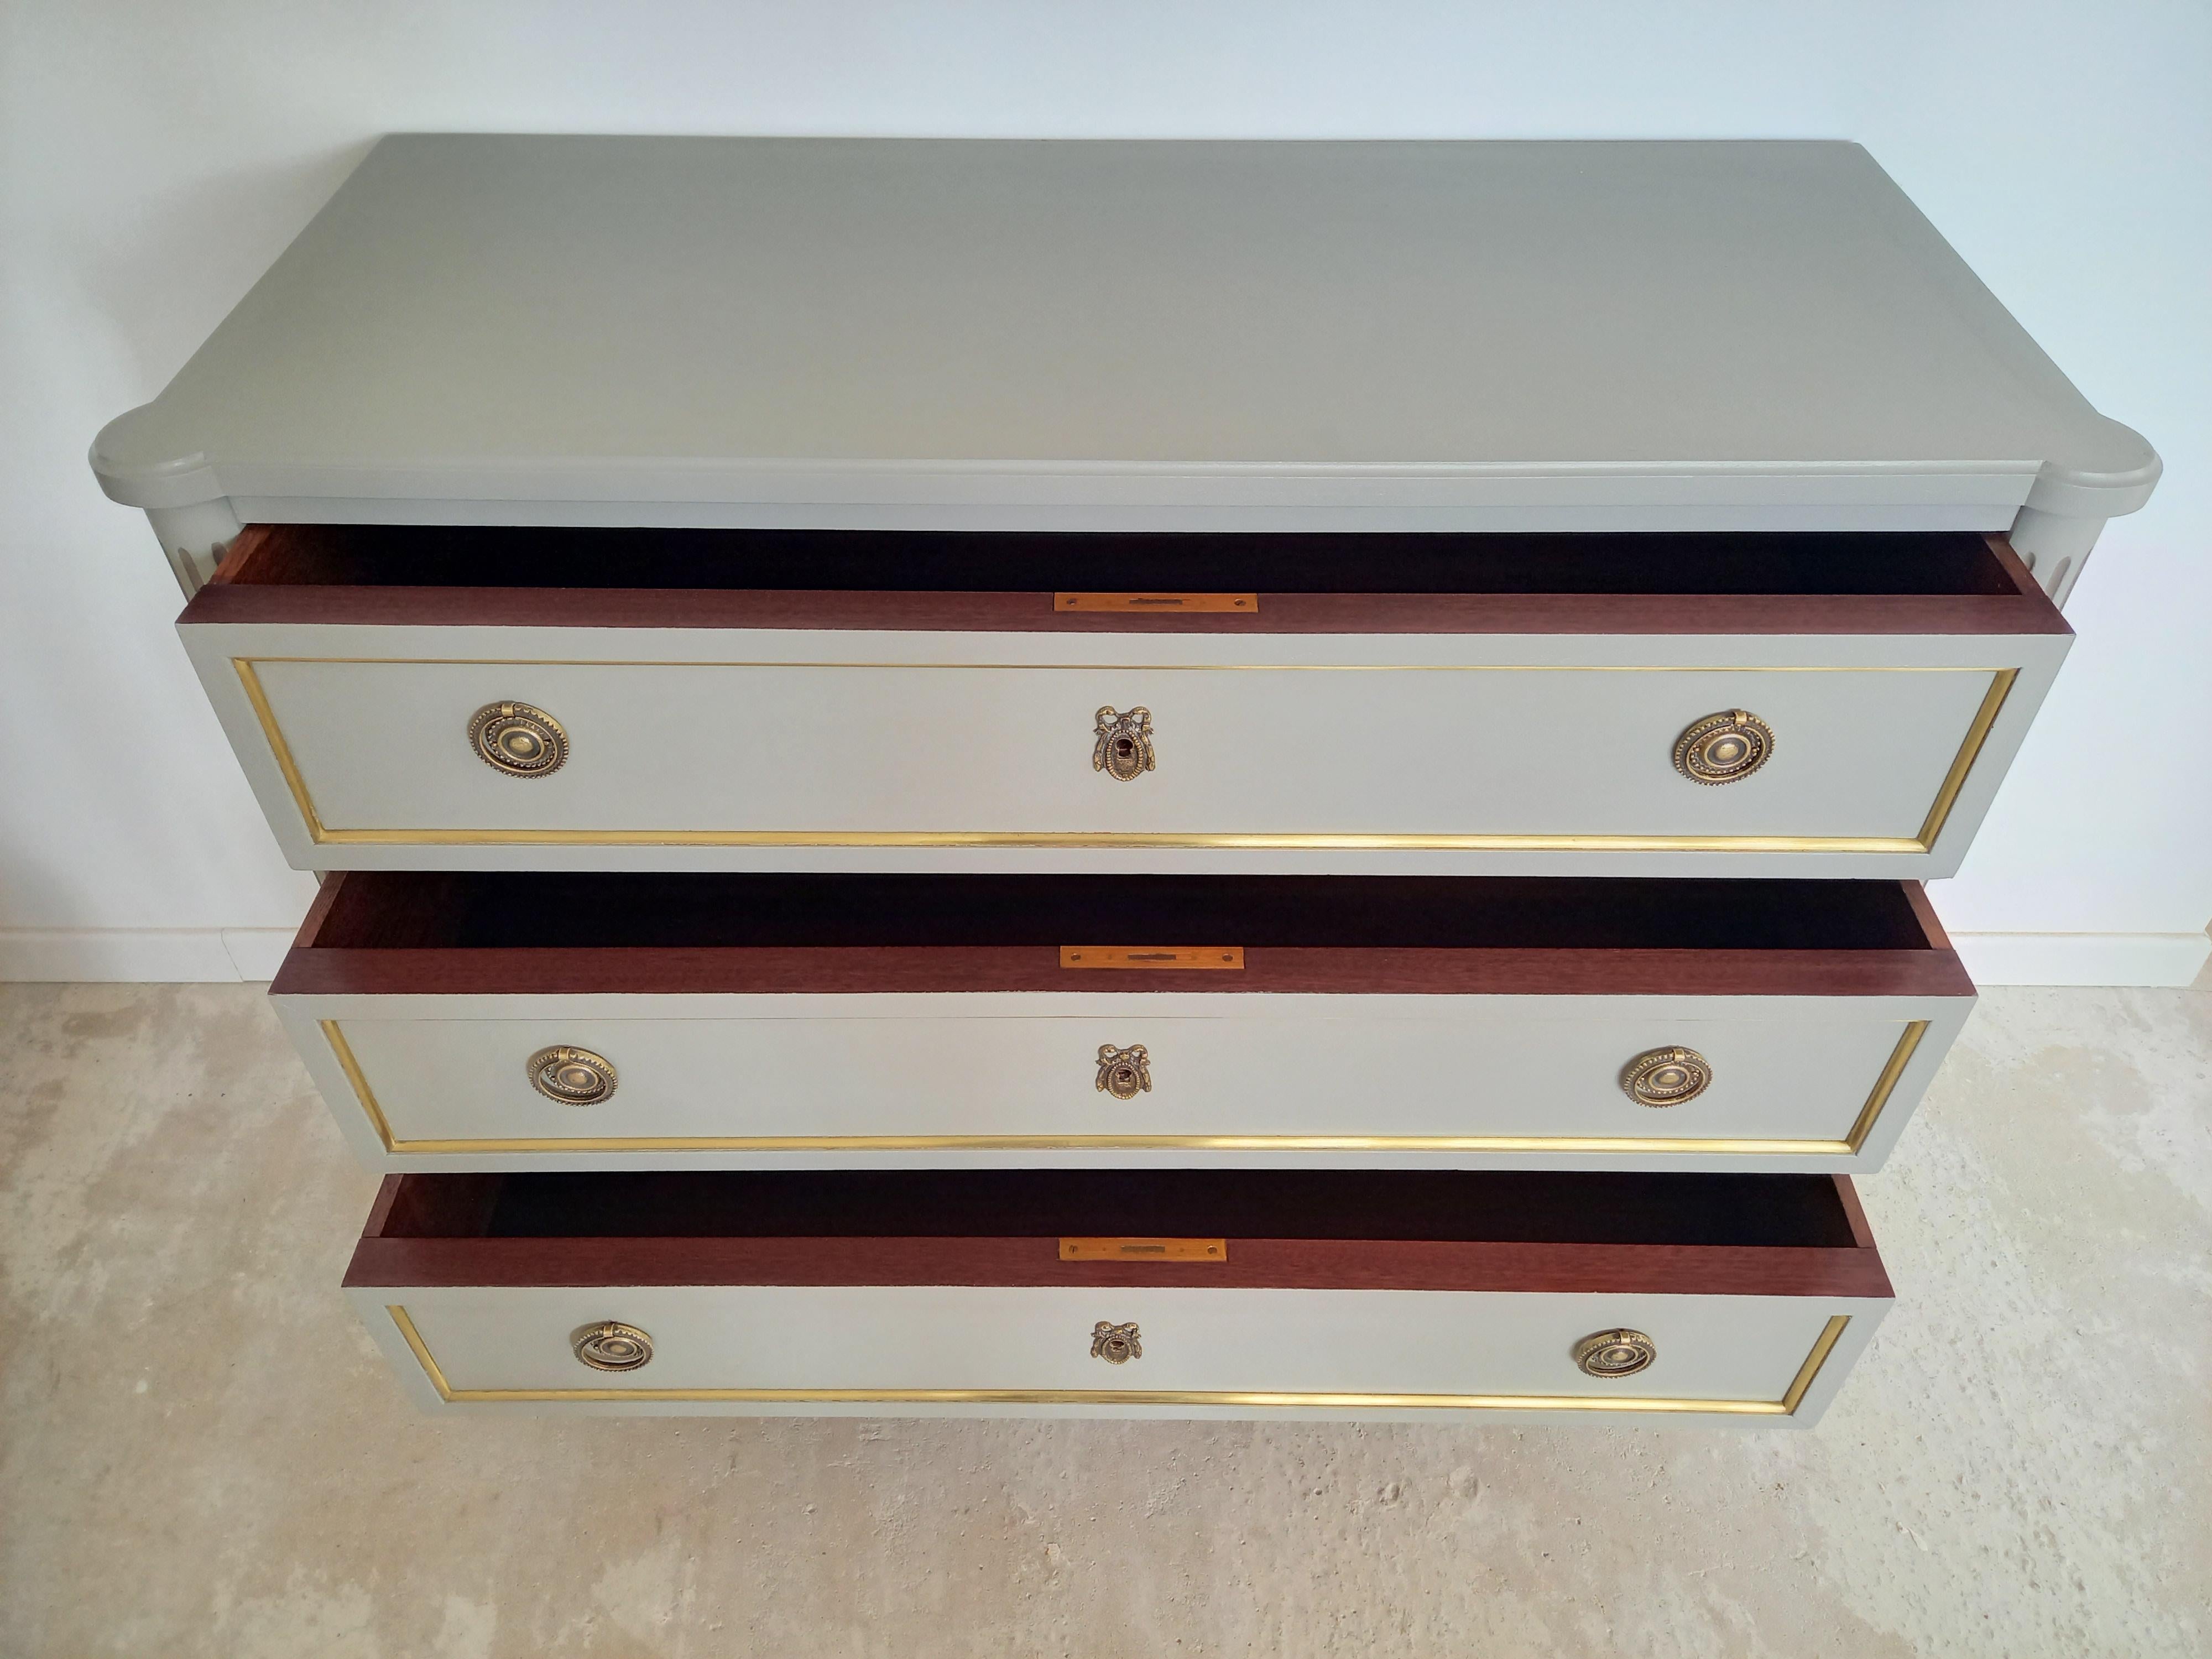 Carrara Marble Antique French, Louis XVI Style Chest of Drawers Commode, Bronze & Brass Details